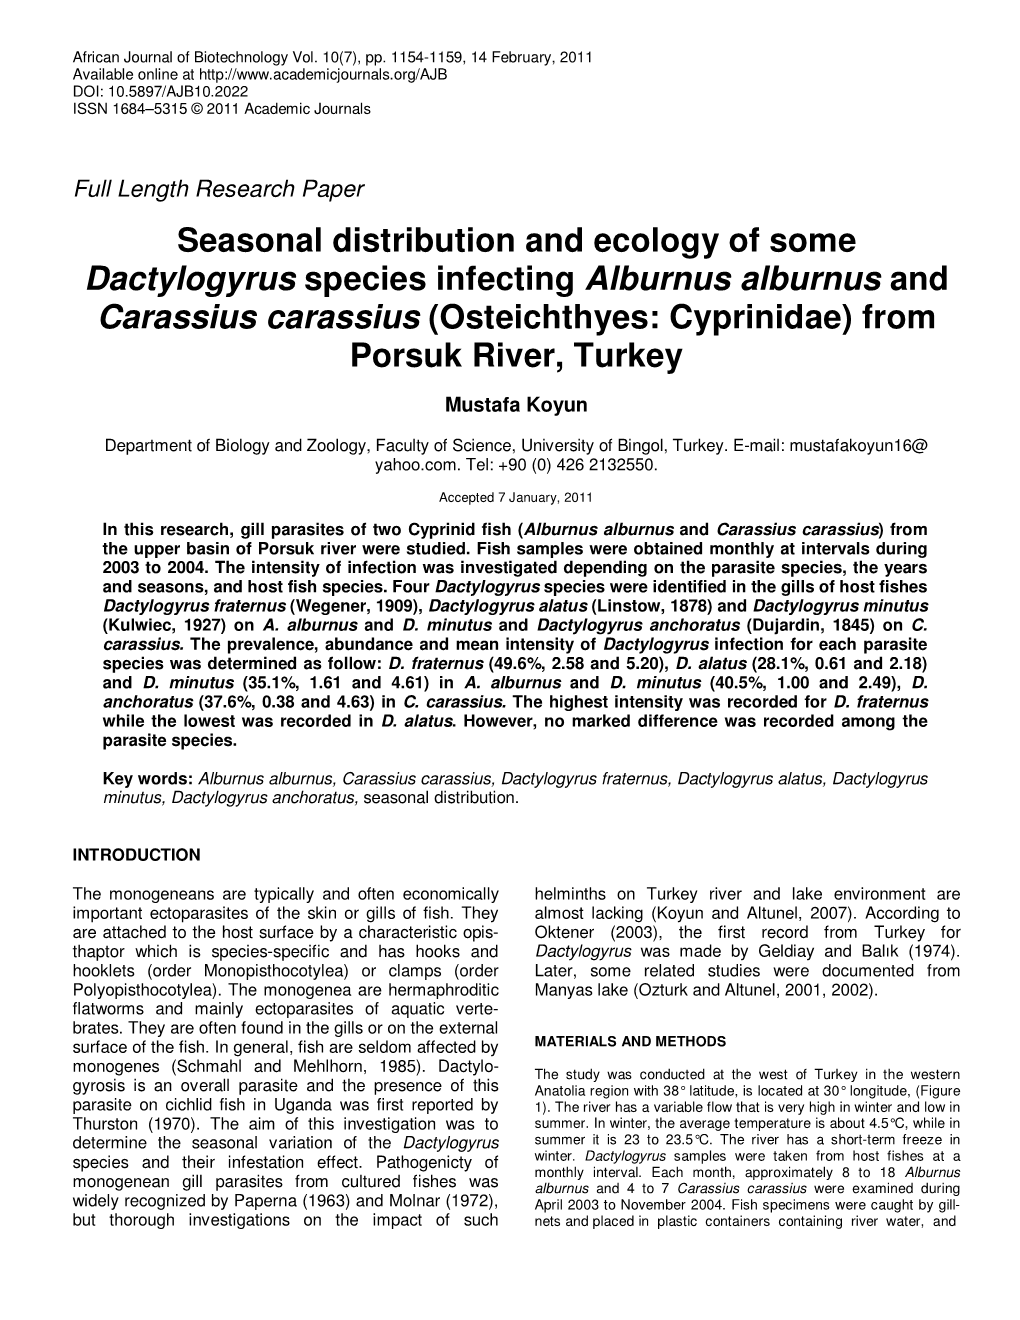 Seasonal Distribution and Ecology of Some Dactylogyrus Species